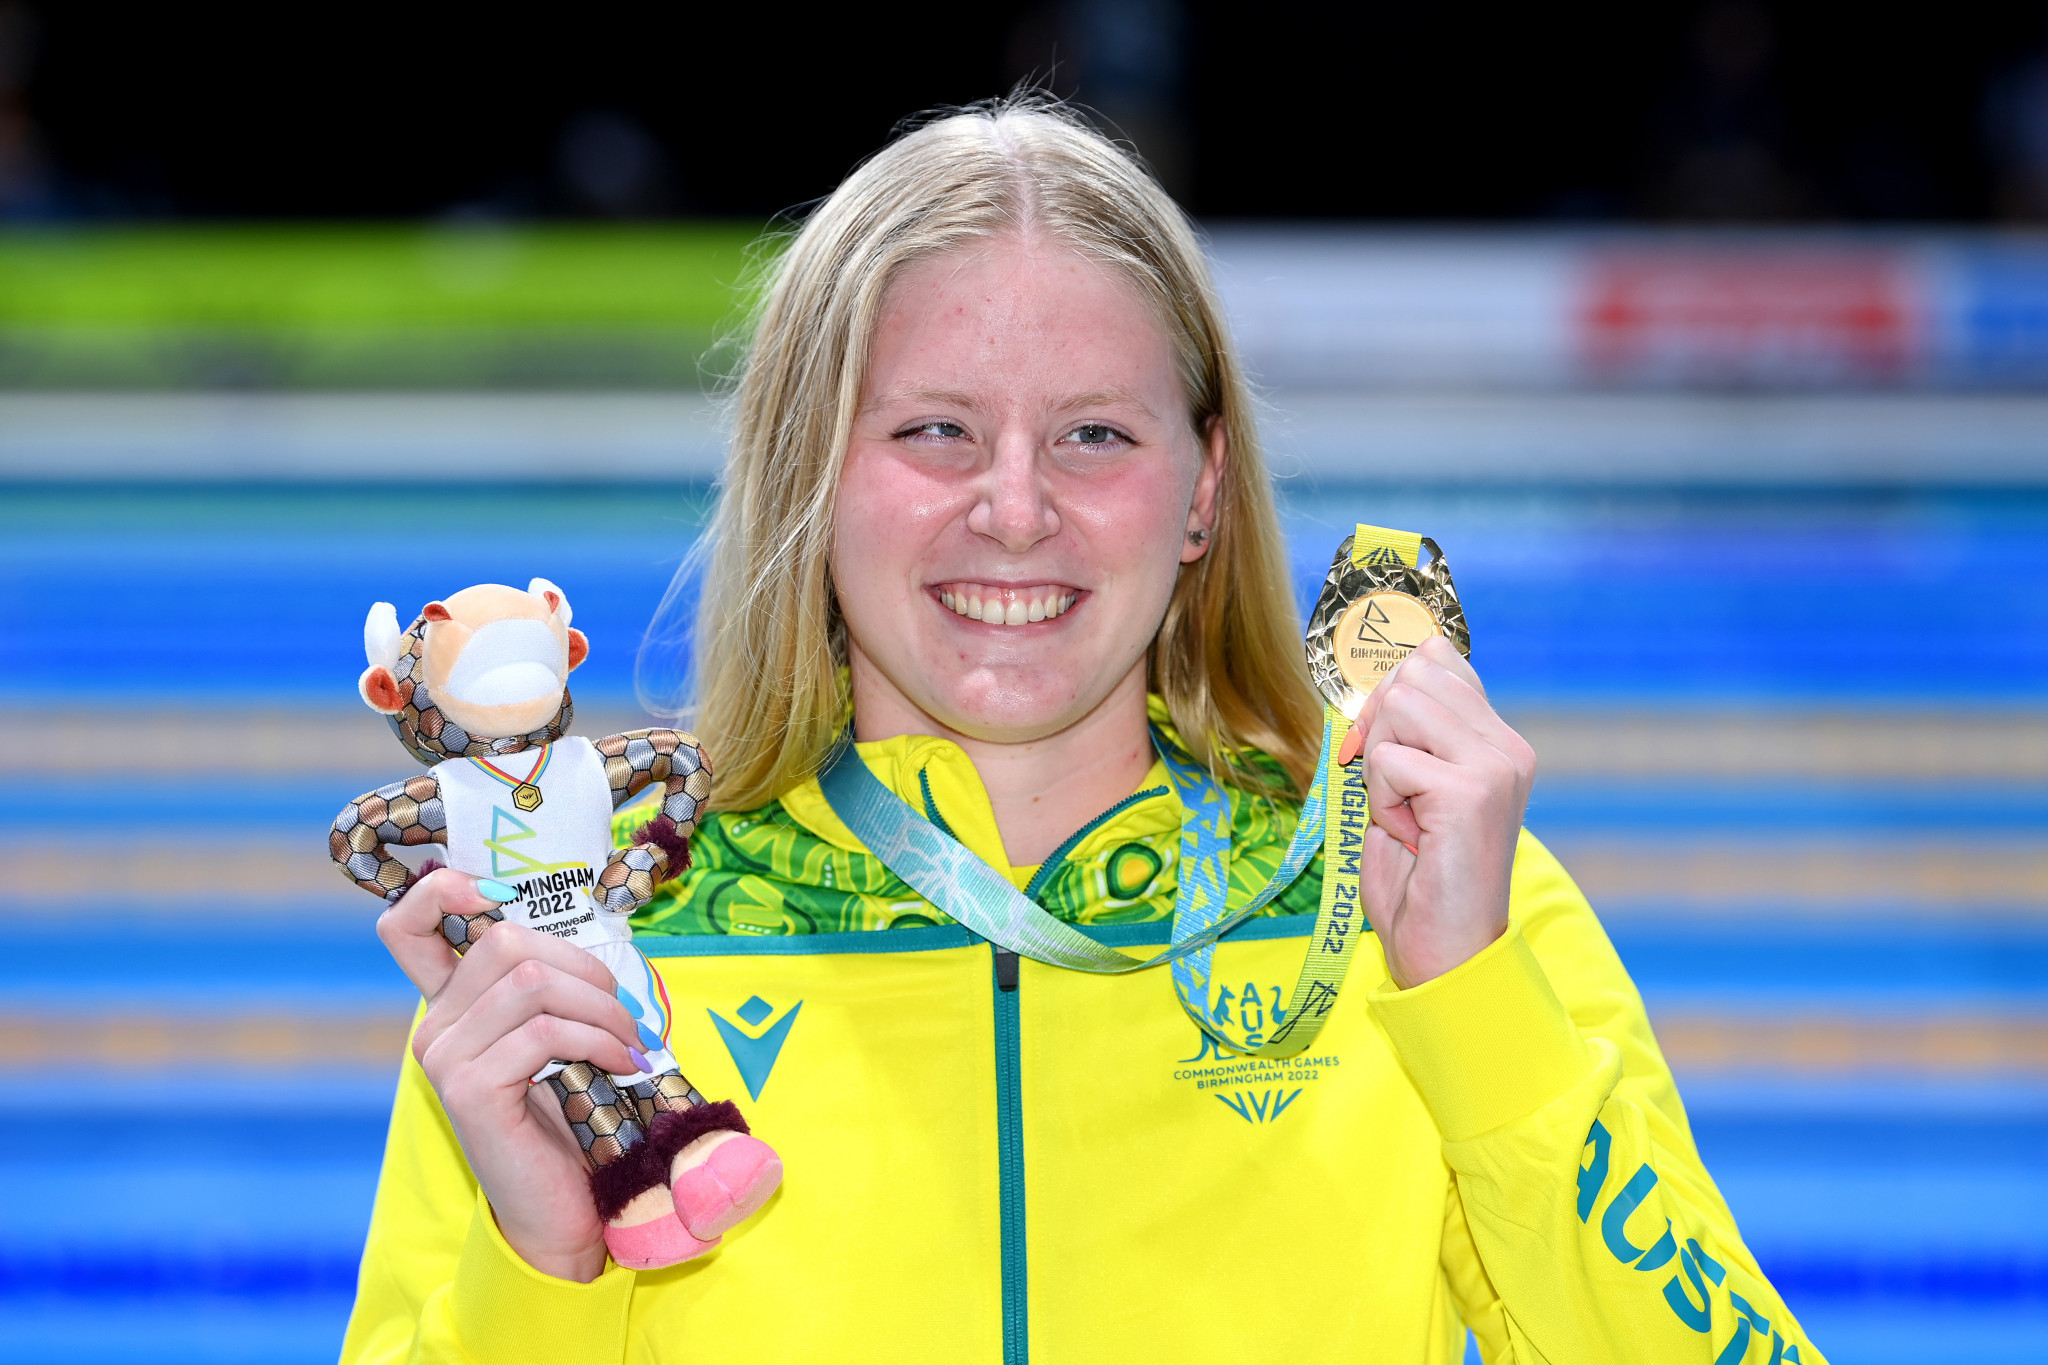 Australia's Katja Dedekind broke the women's 50m freestyle S13 world record with her time of 26.56 ©Getty Images